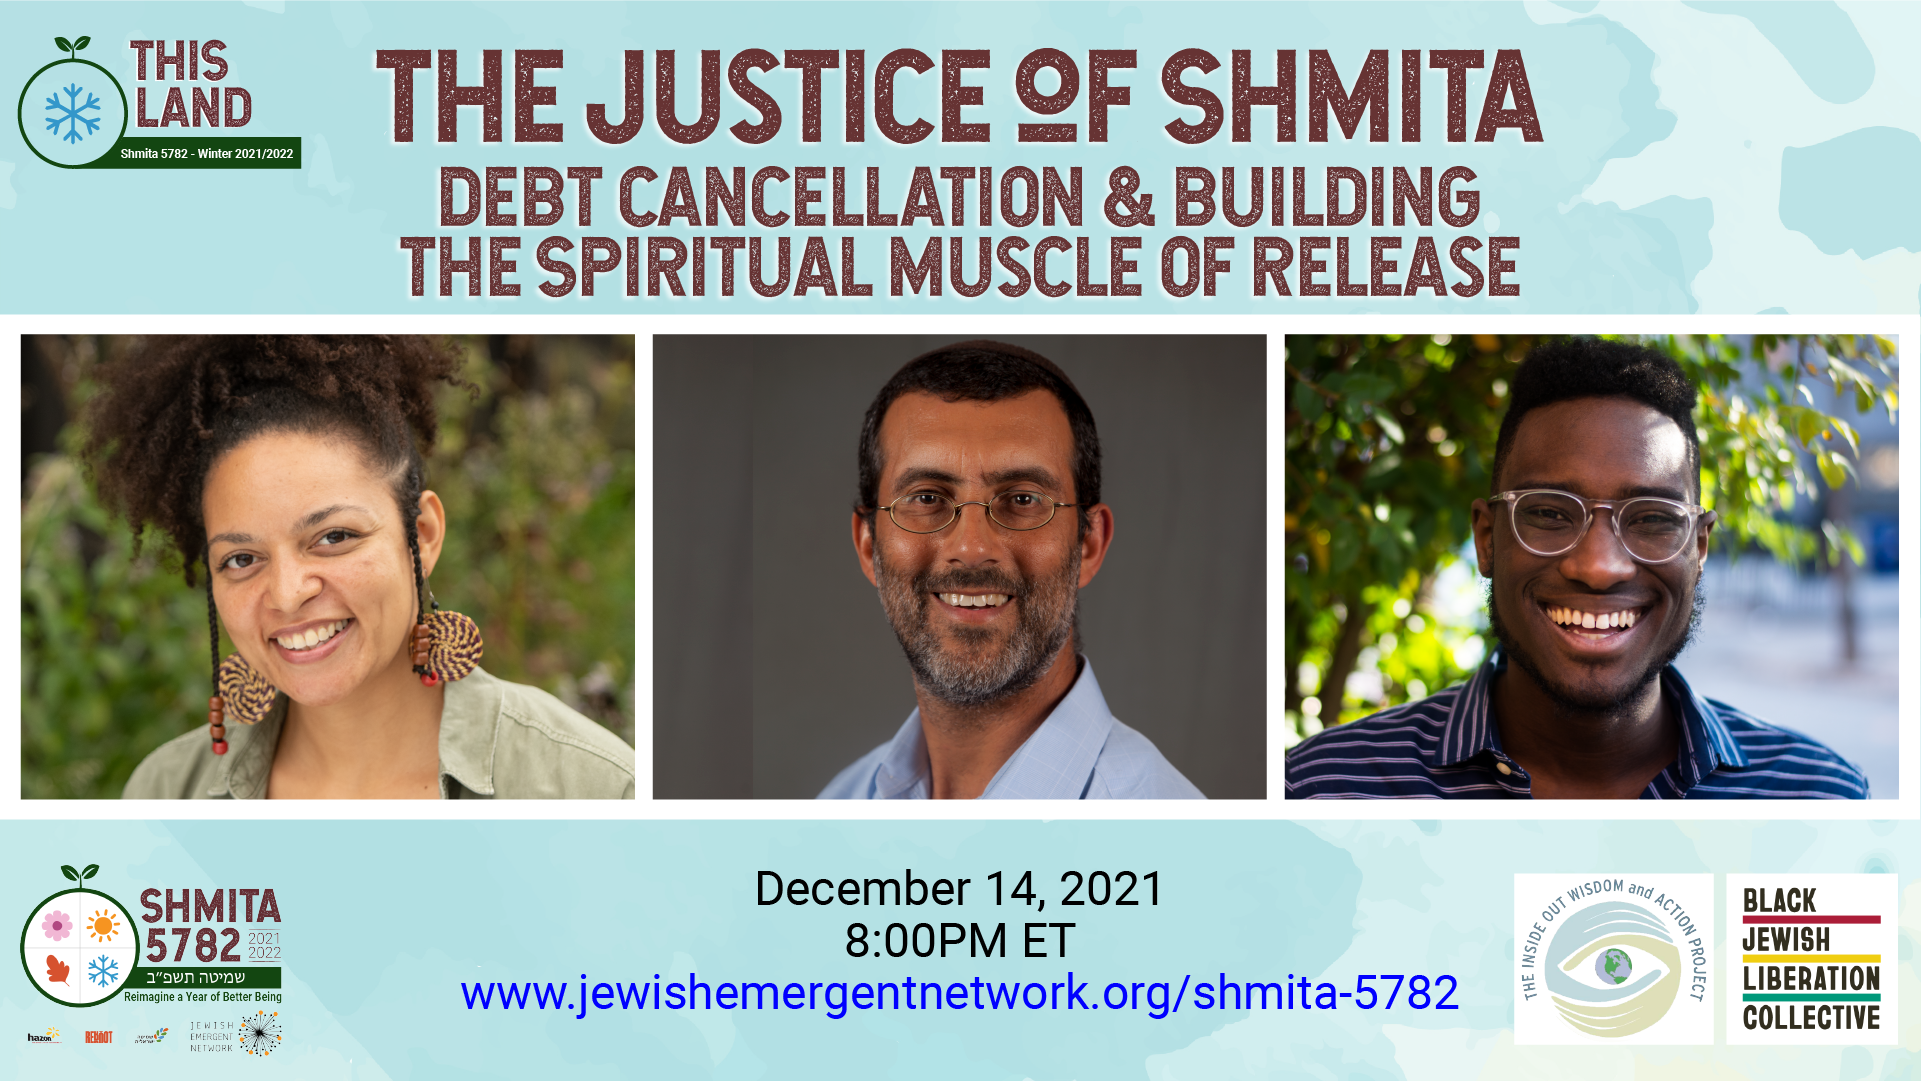 The Justice of Shmita: Debt Cancellation & Building the Spiritual Muscle of Release